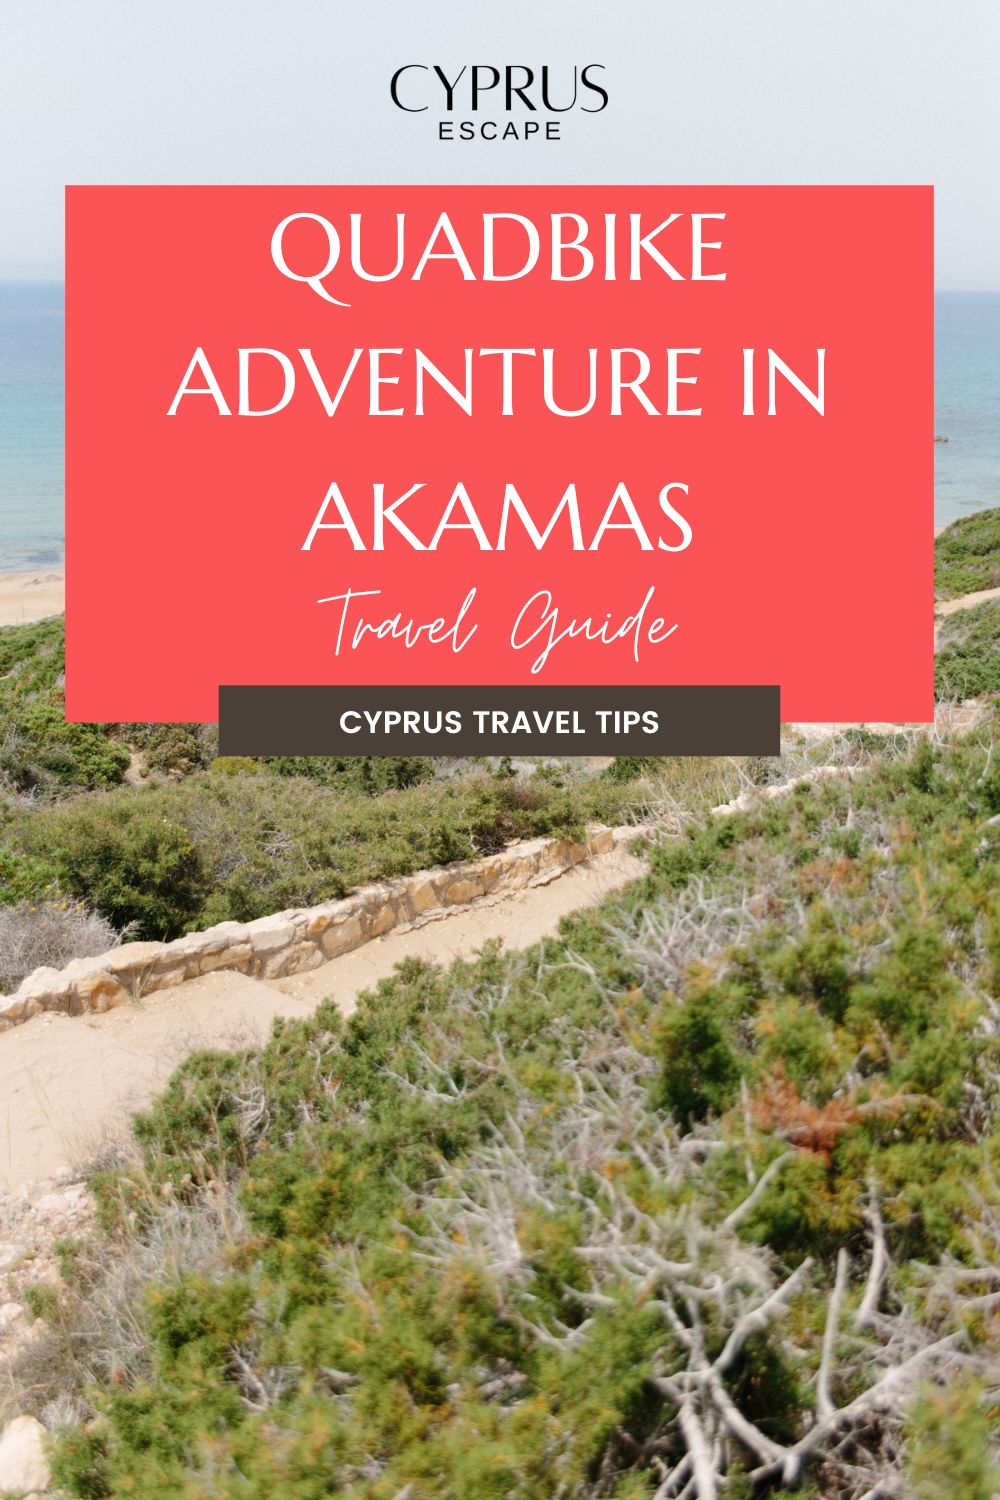 Pinterest Image For An Article About Quadbike Adventure in Akamas